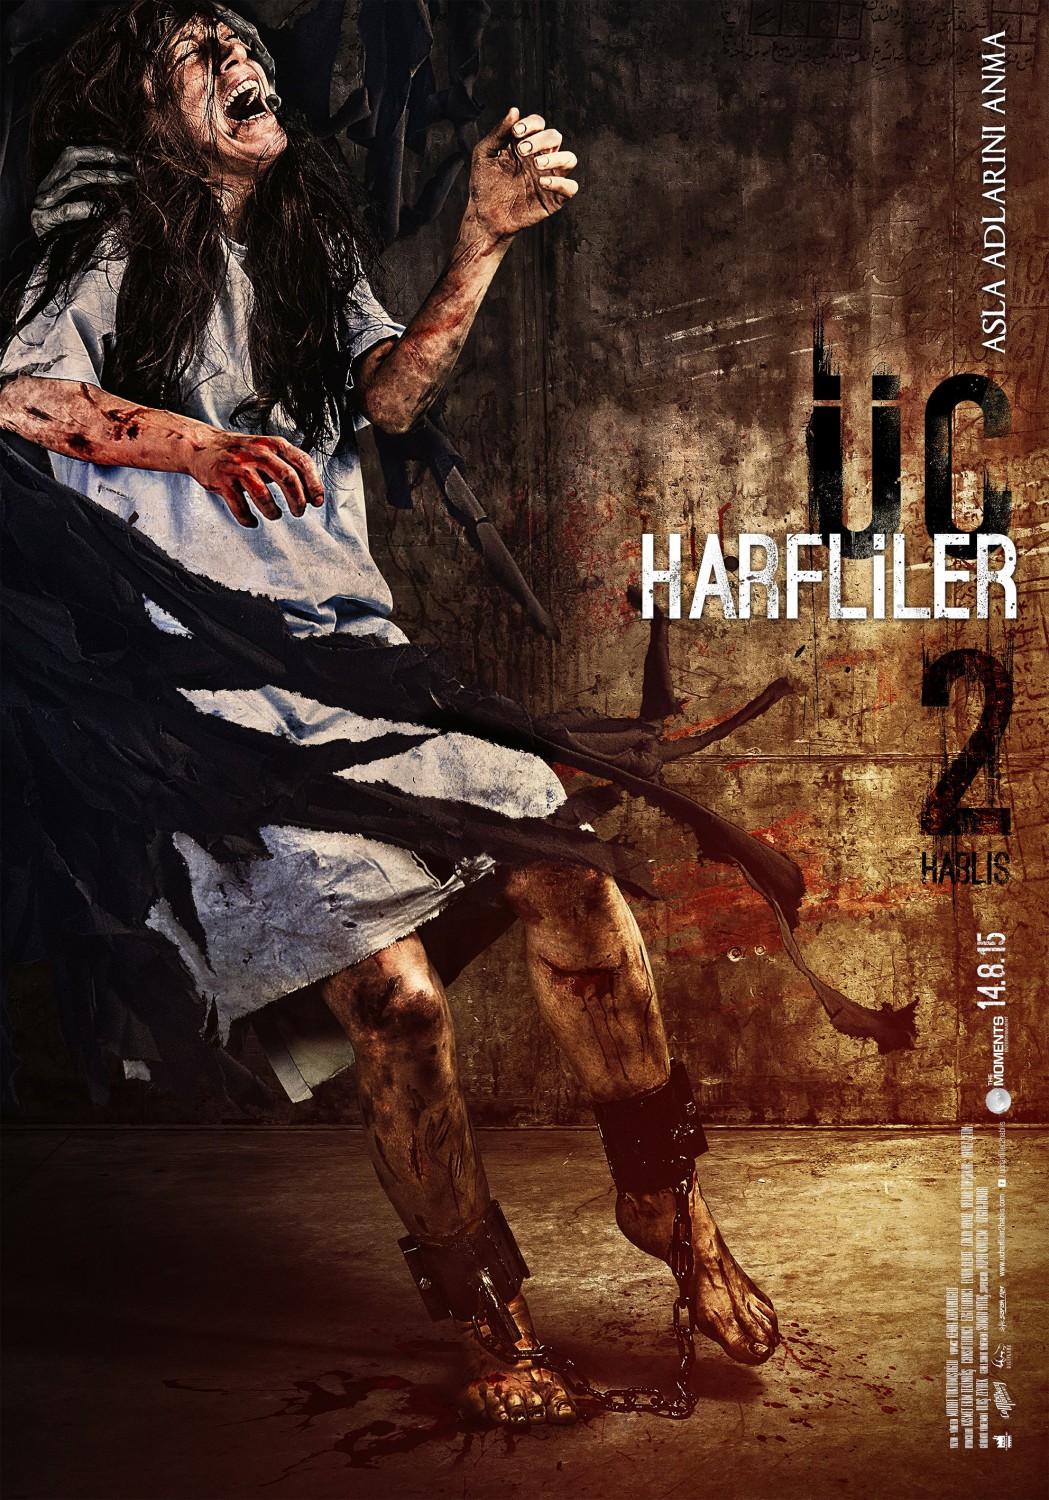 Extra Large Movie Poster Image for Uc Harfliler 2: Hablis (#2 of 4)